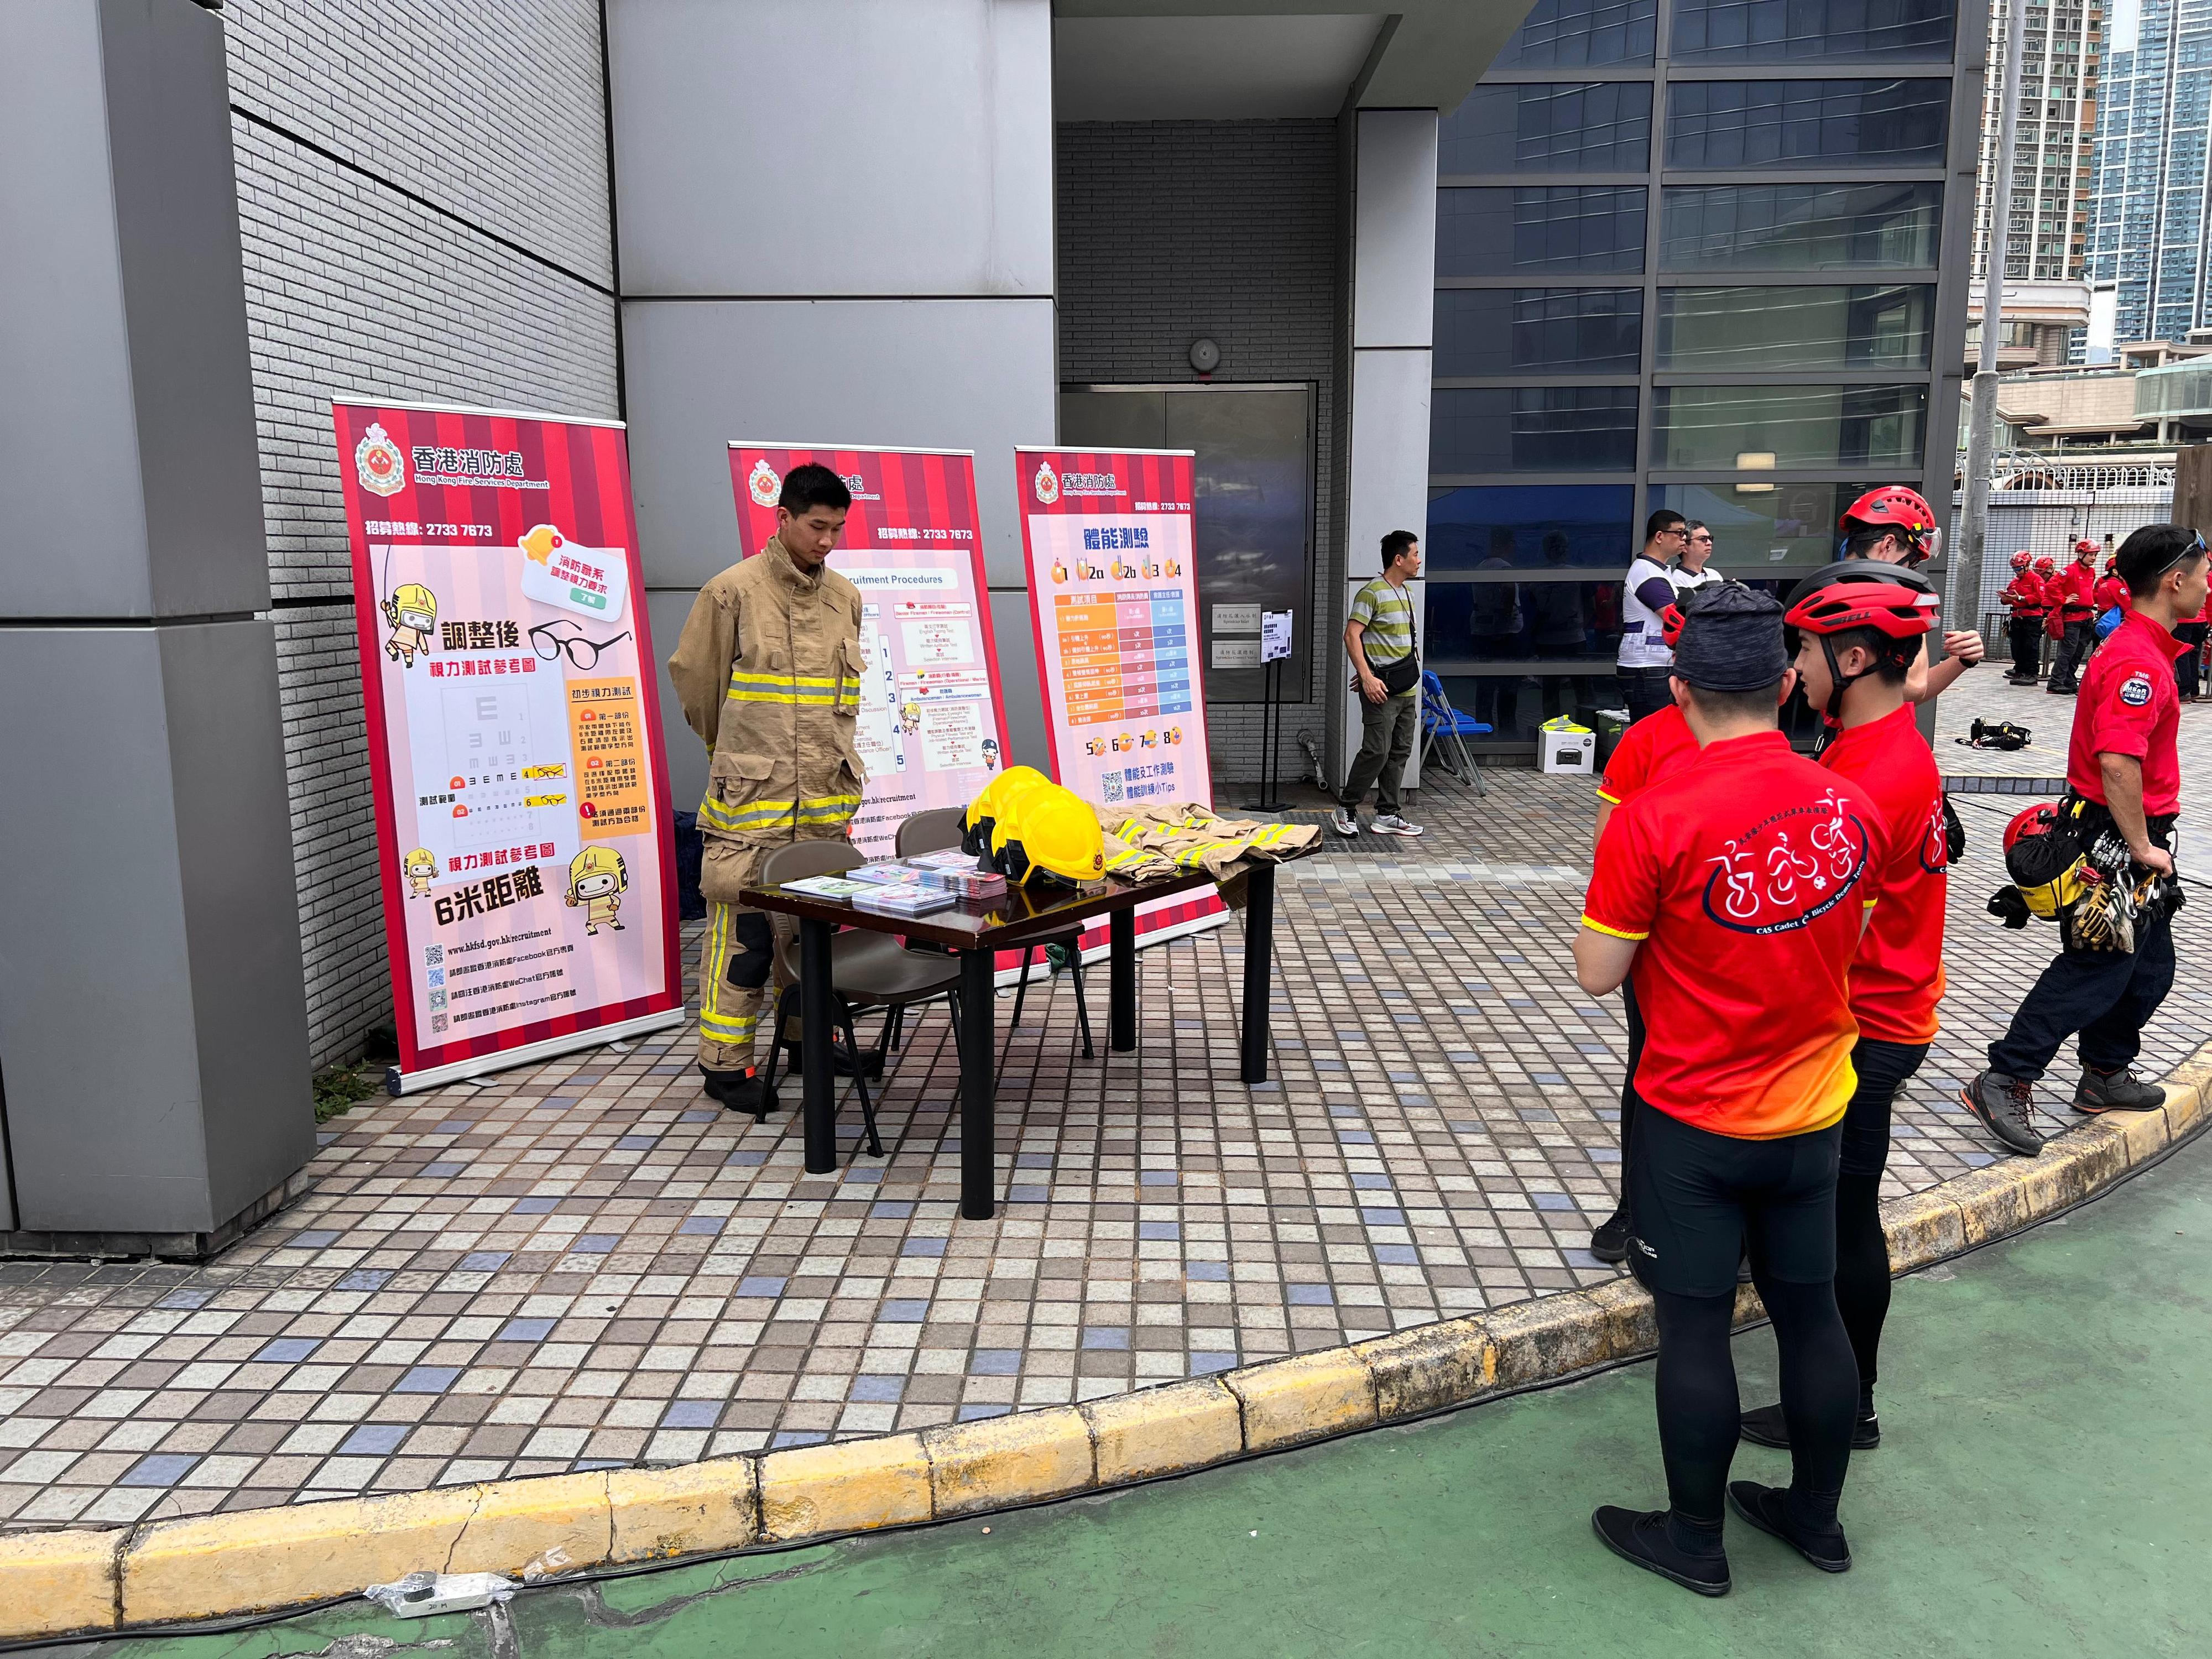 The Civil Aid Service held an open day at its headquarters today (April 14) to promote the National Security Education Day. Photo shows members of public visiting the Simulated Tunnel and Chute Training Chamber of the Fire Services Department.